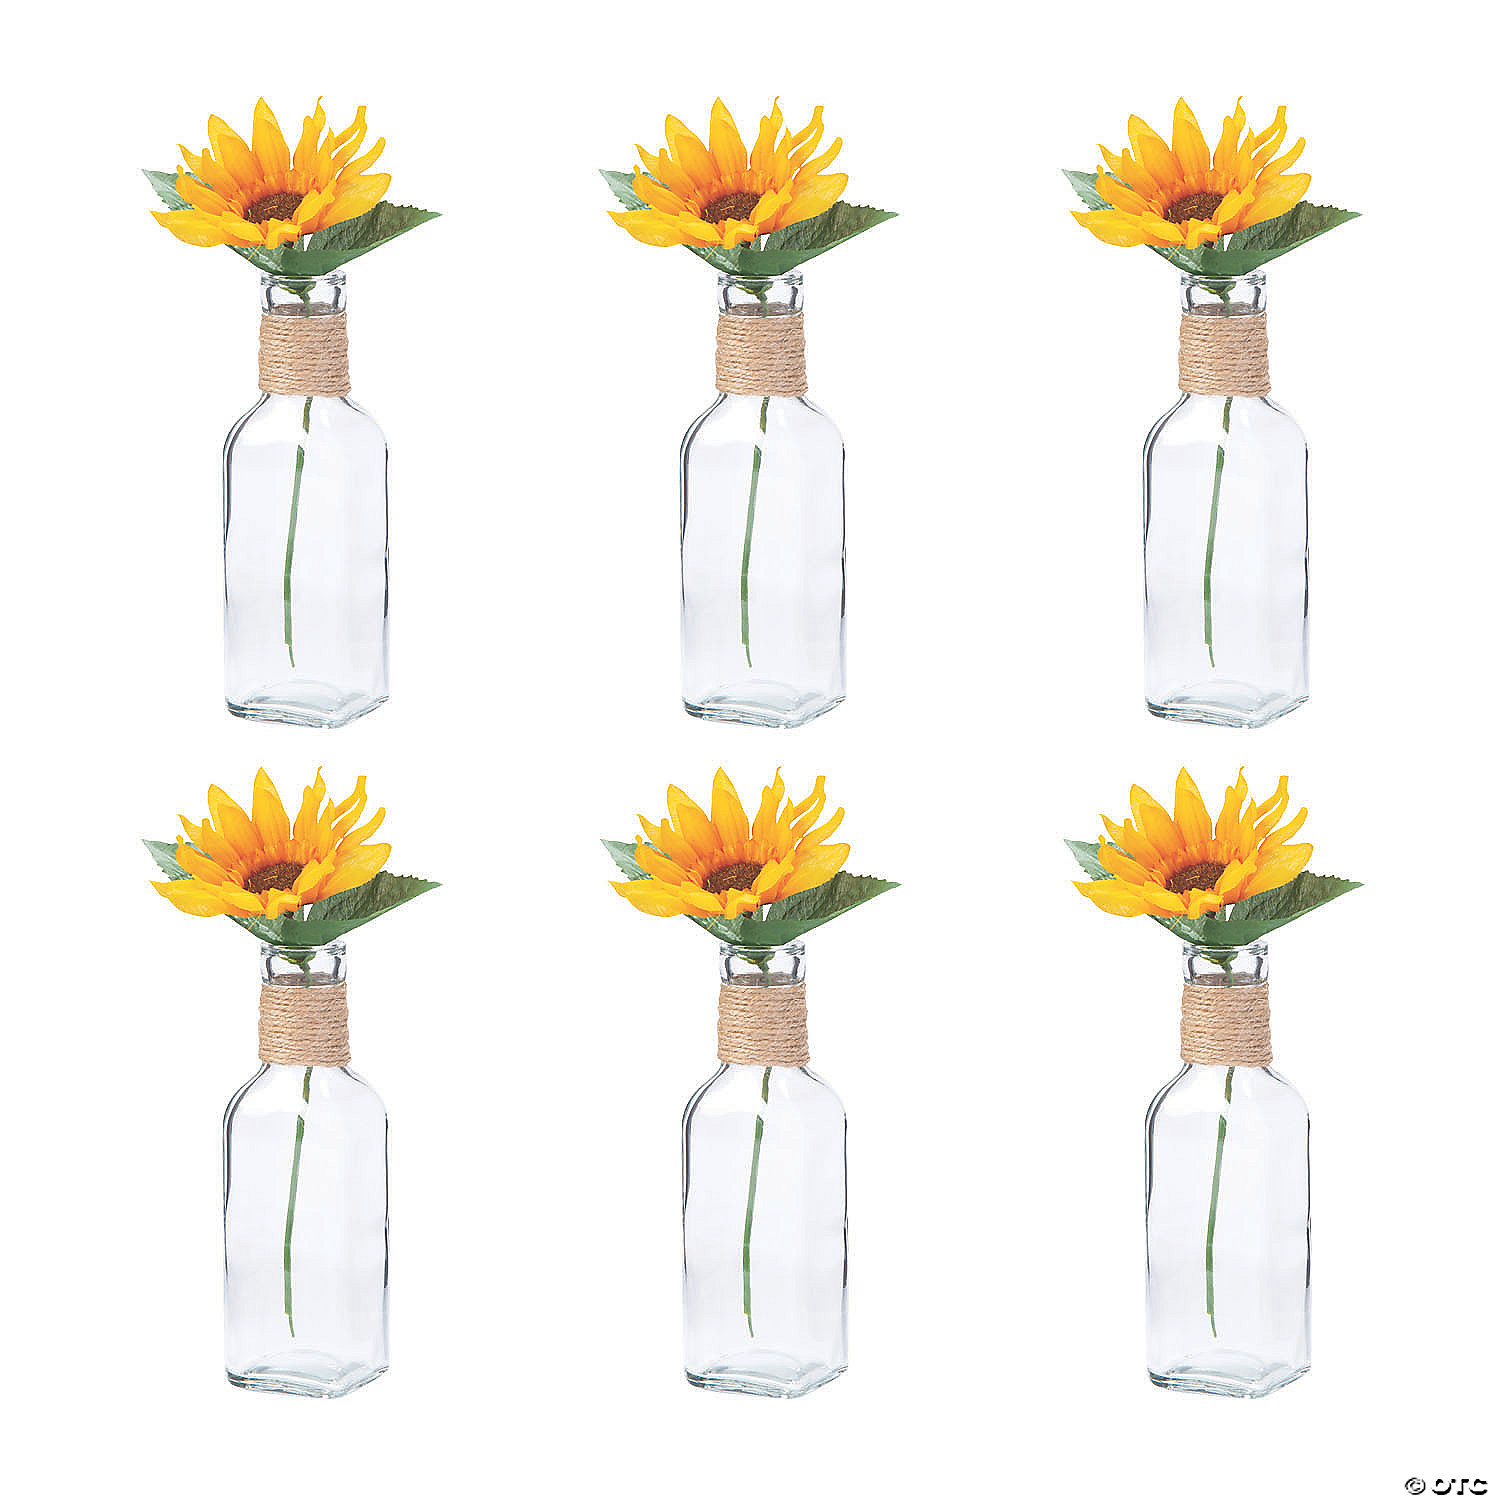 Sunflowers are a very beautiful and versatile flower that can be used to create a wide variety of beautiful decorations. If you are looking for a flower to decorate your wedding or holiday event, sunflowers are a great choice.